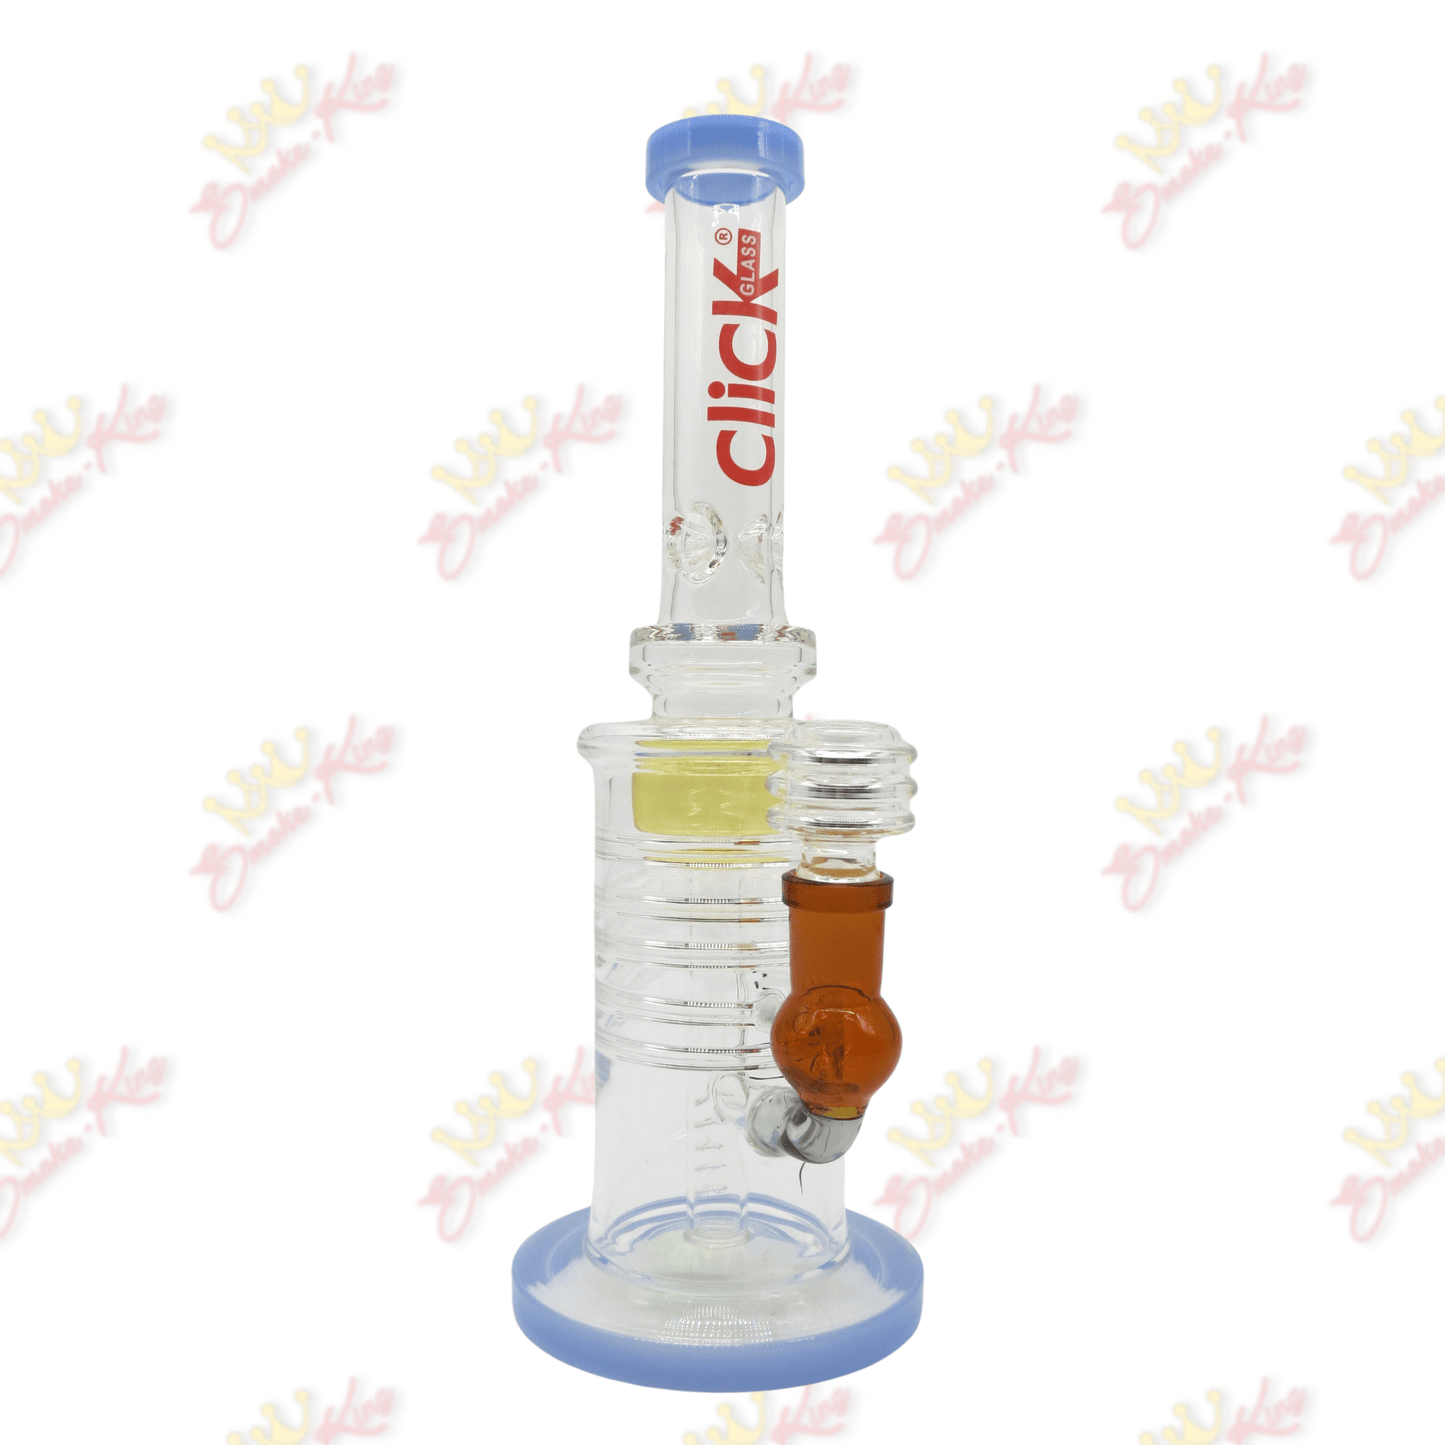 Click Glass 11" Inch Click Glass Straight Bong 11" Inch Click Glass Straight Bong | Smoke King